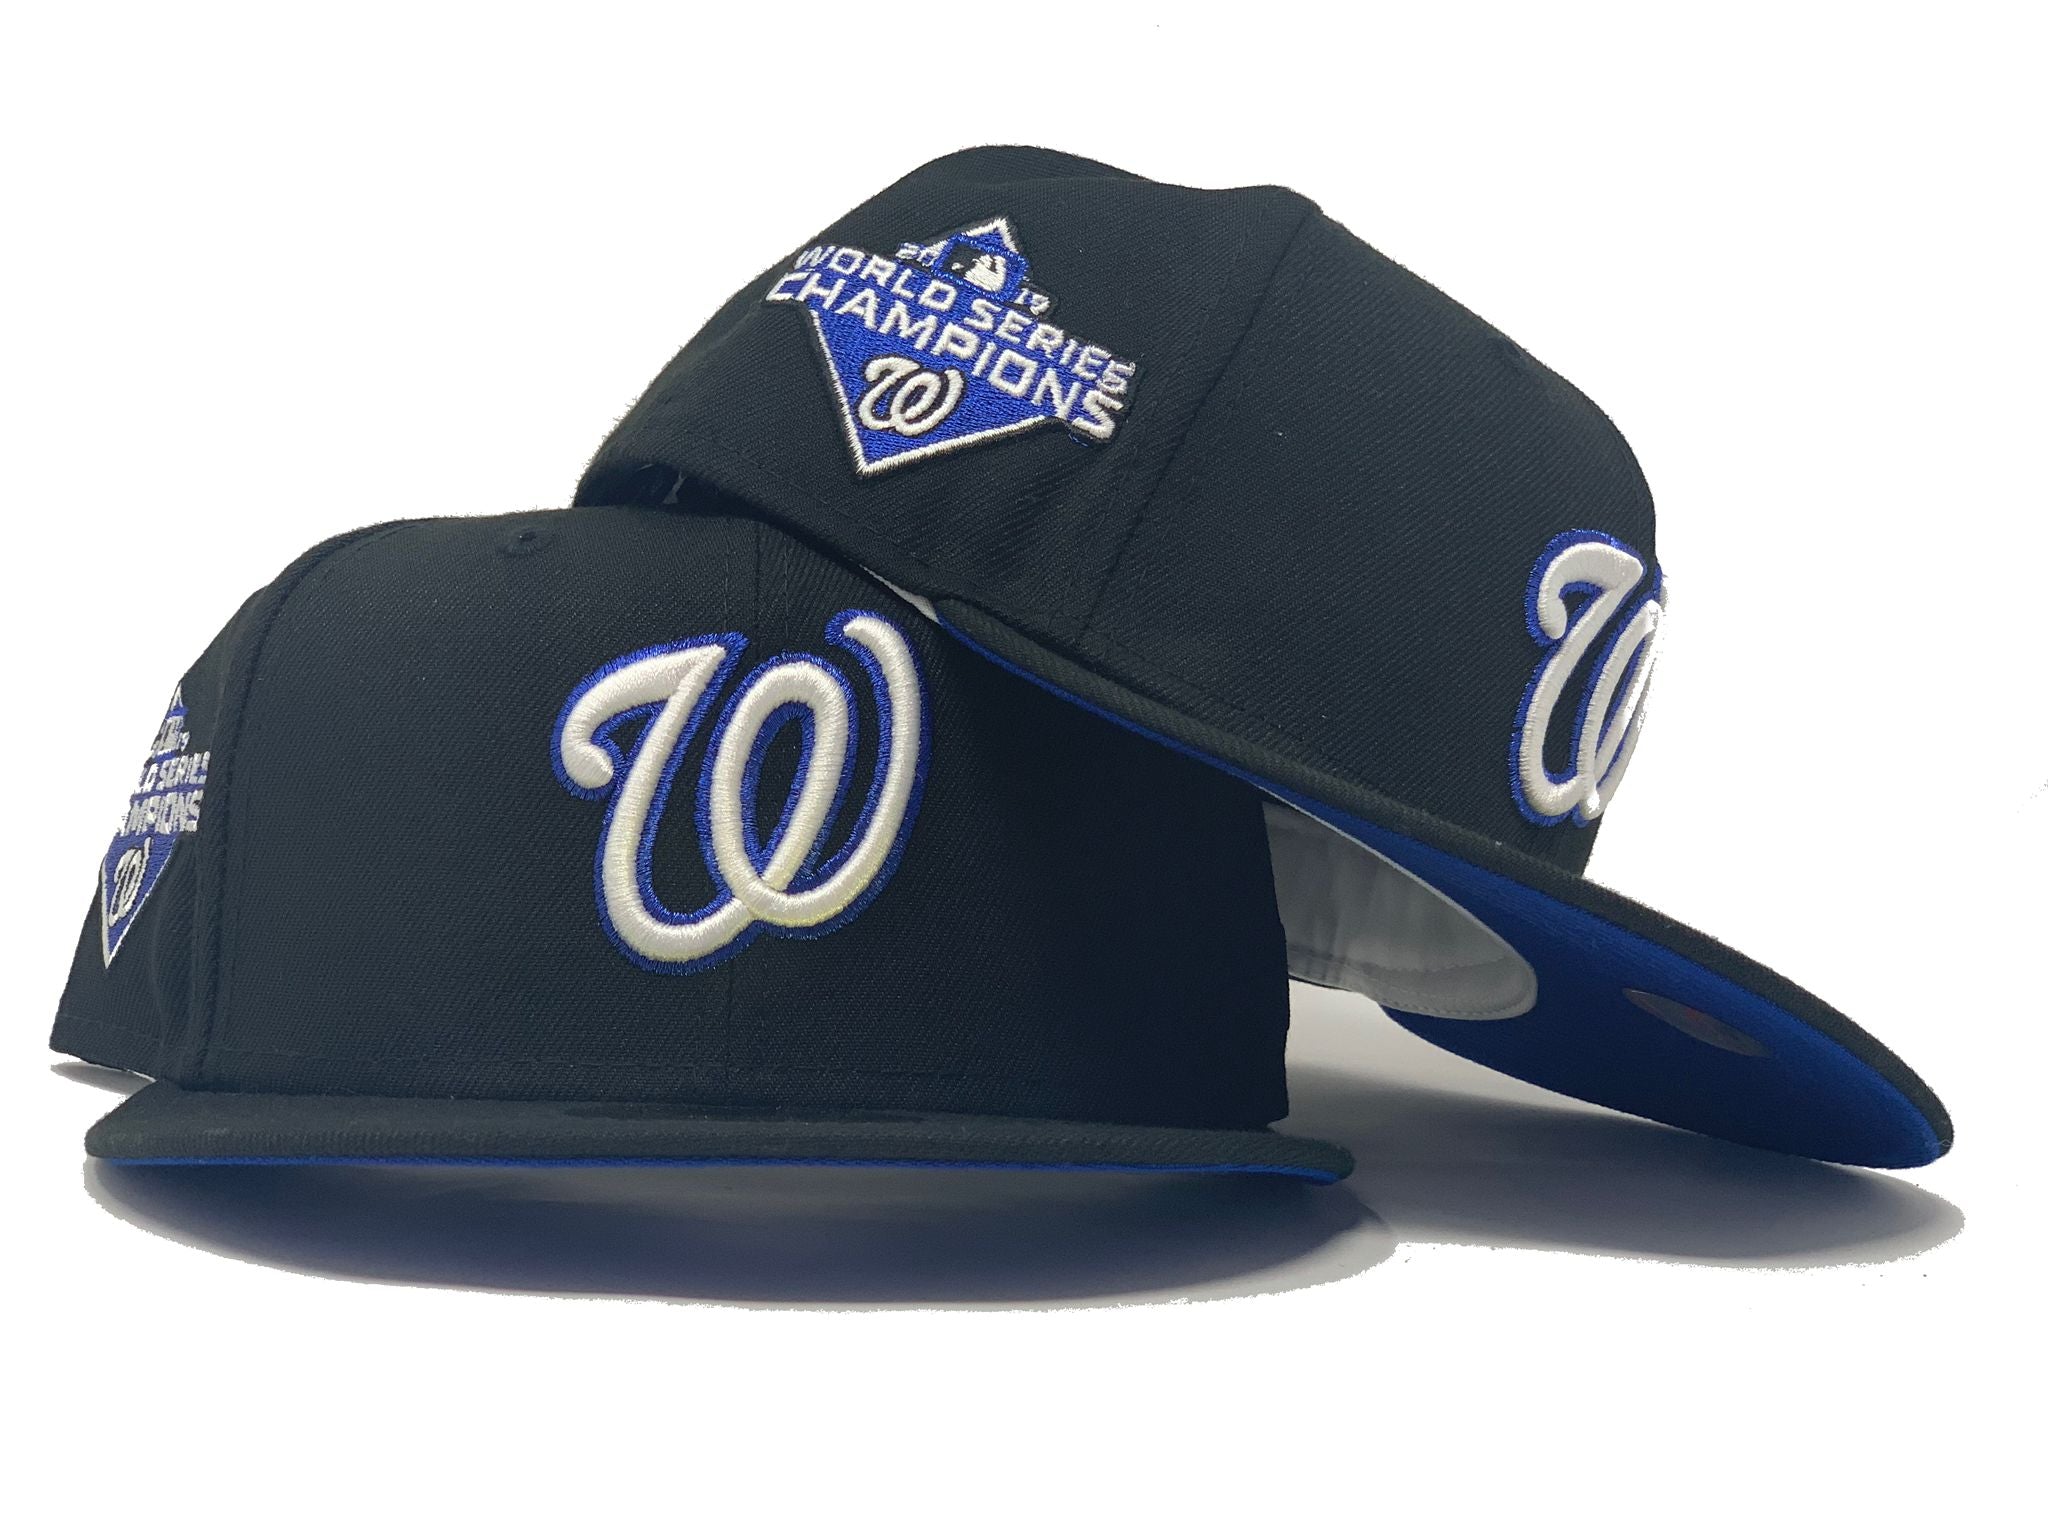 Washington Nationals New Era Jersey 59FIFTY Fitted Hat - Black